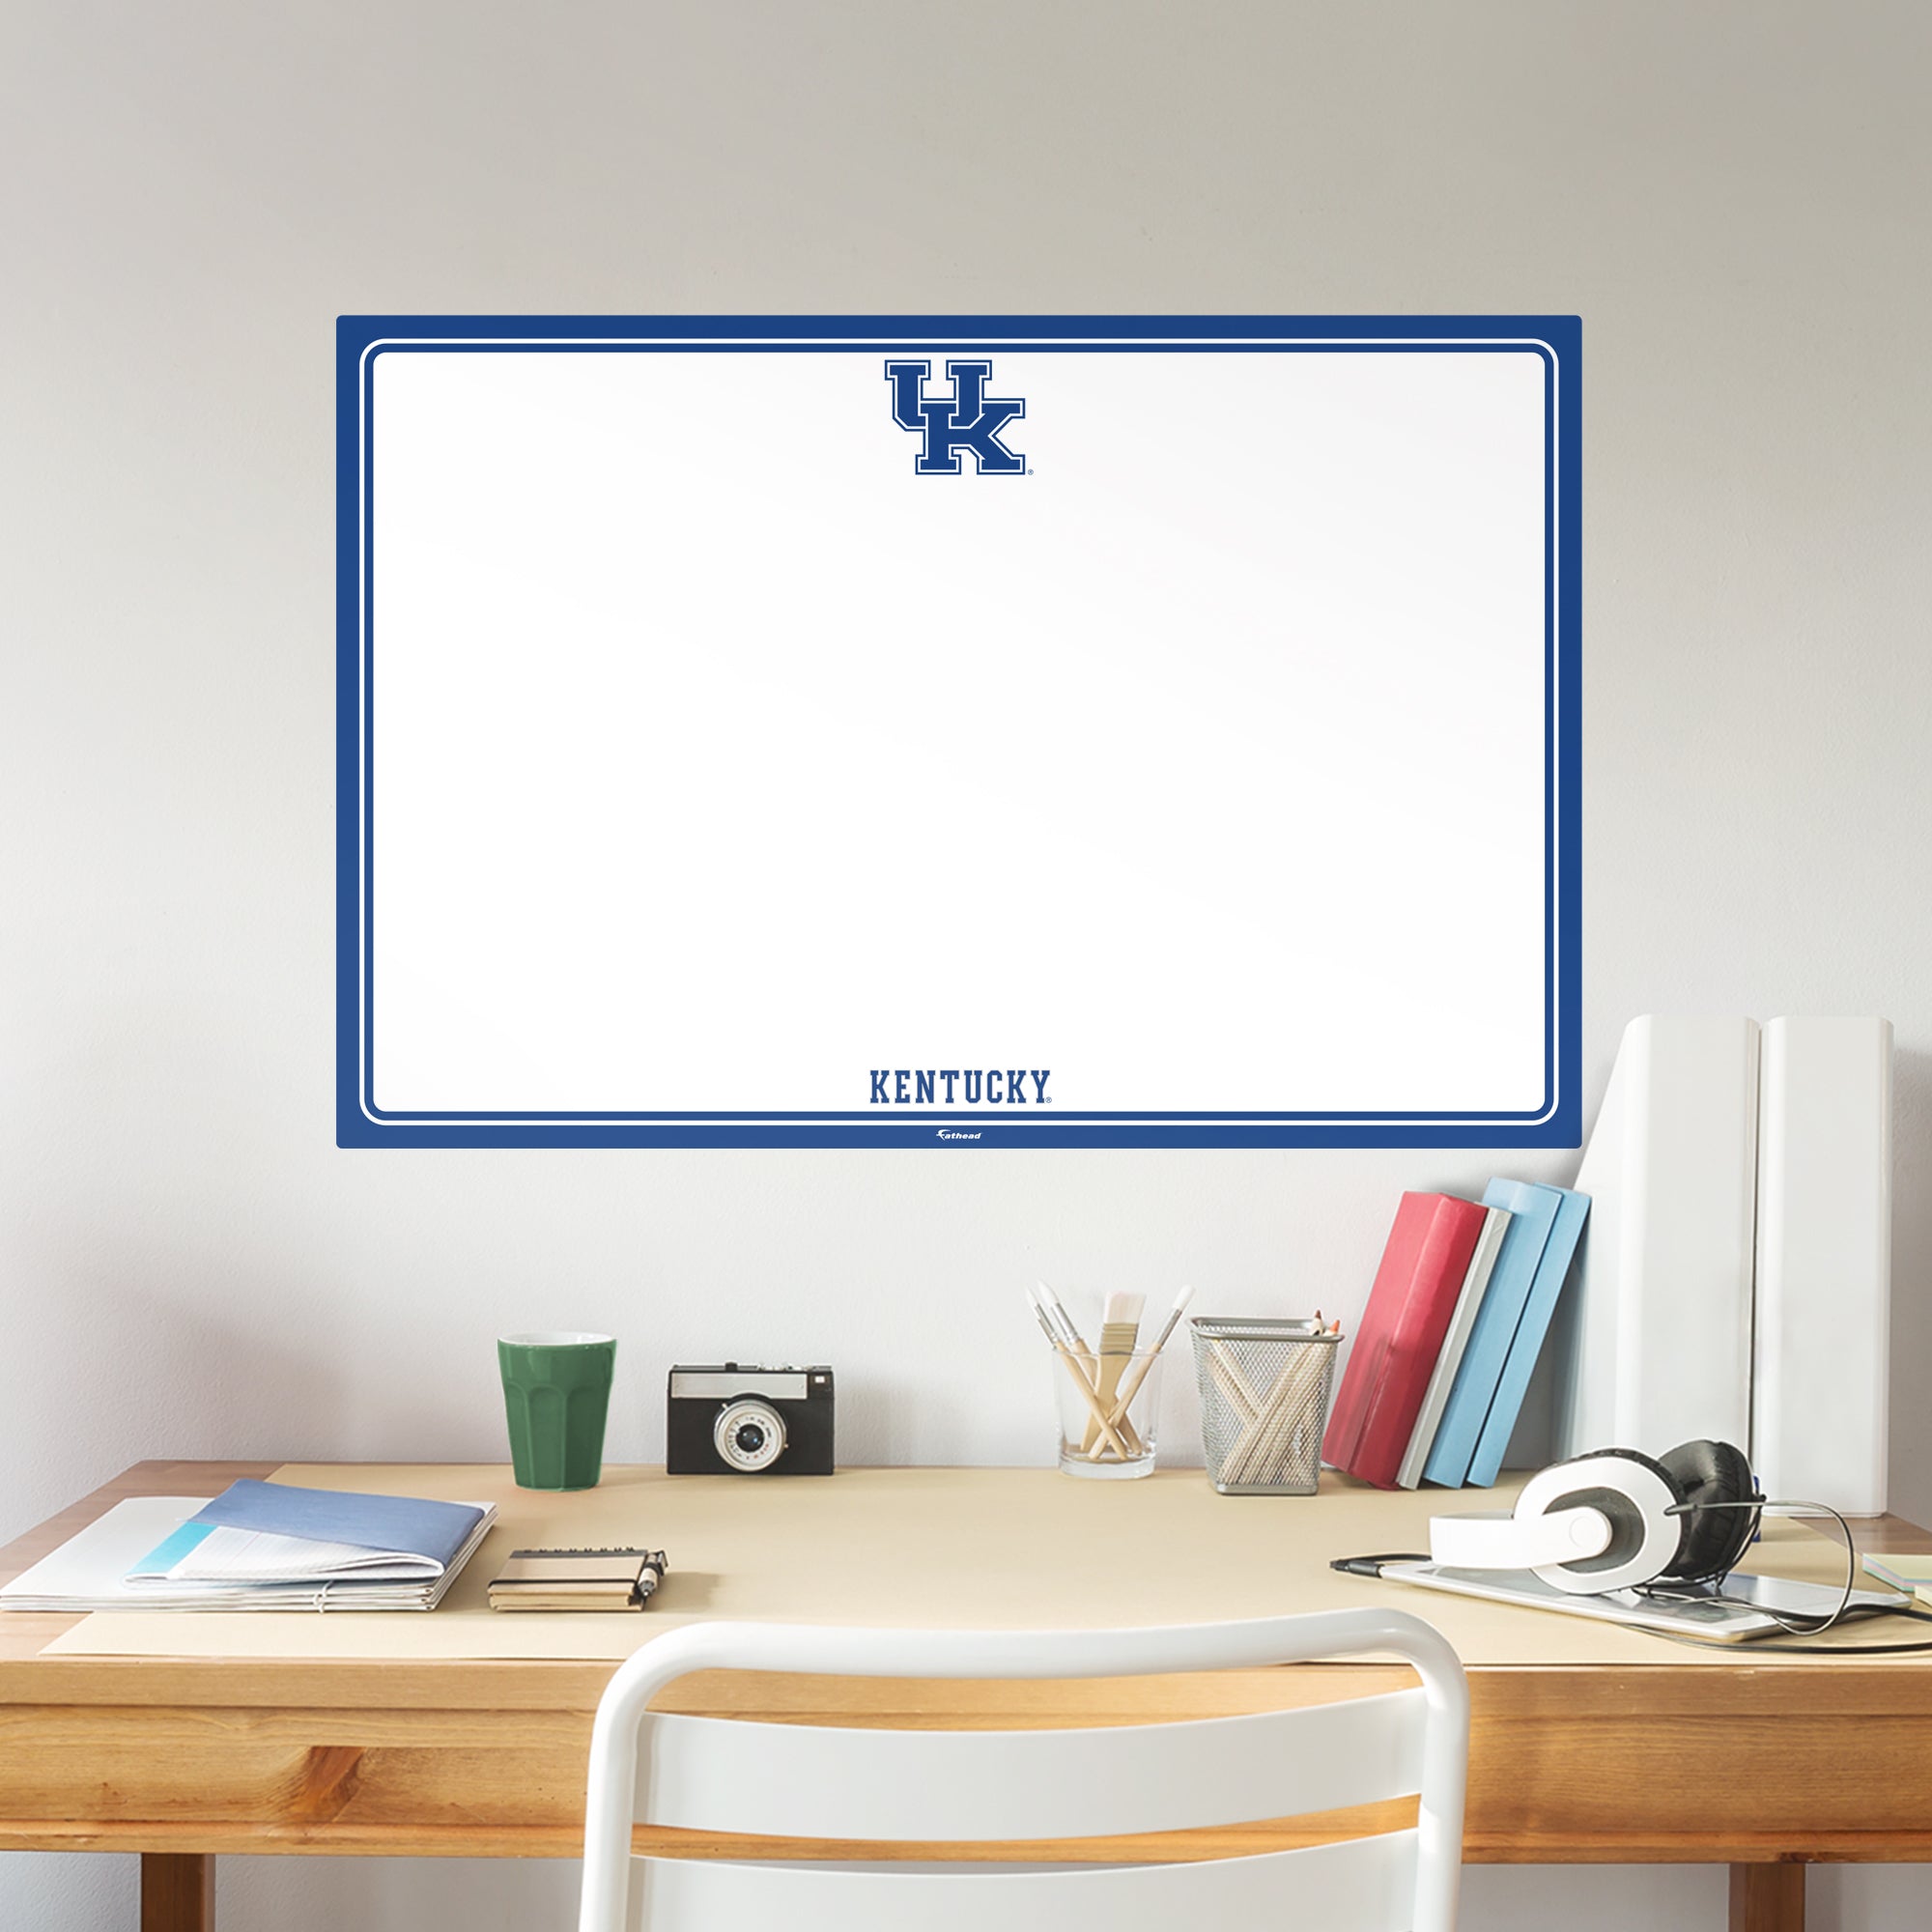 Kentucky Wildcats: Dry Erase Whiteboard - X-Large Officially Licensed NCAA Removable Wall Decal XL by Fathead | Vinyl